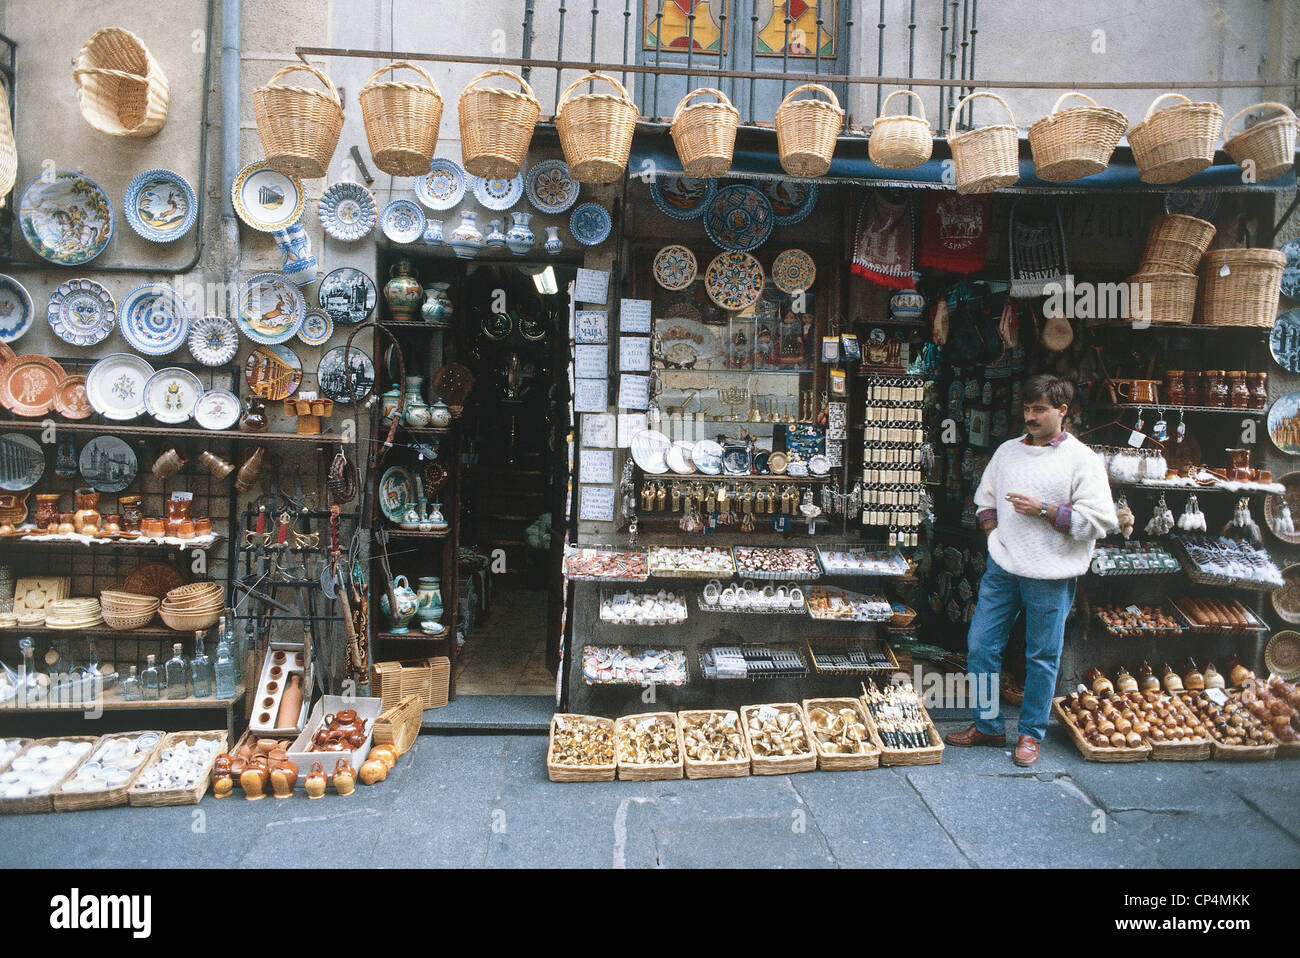 Souvenirs Of Spain Stock Photo, Picture and Royalty Free Image. Image  19811491.